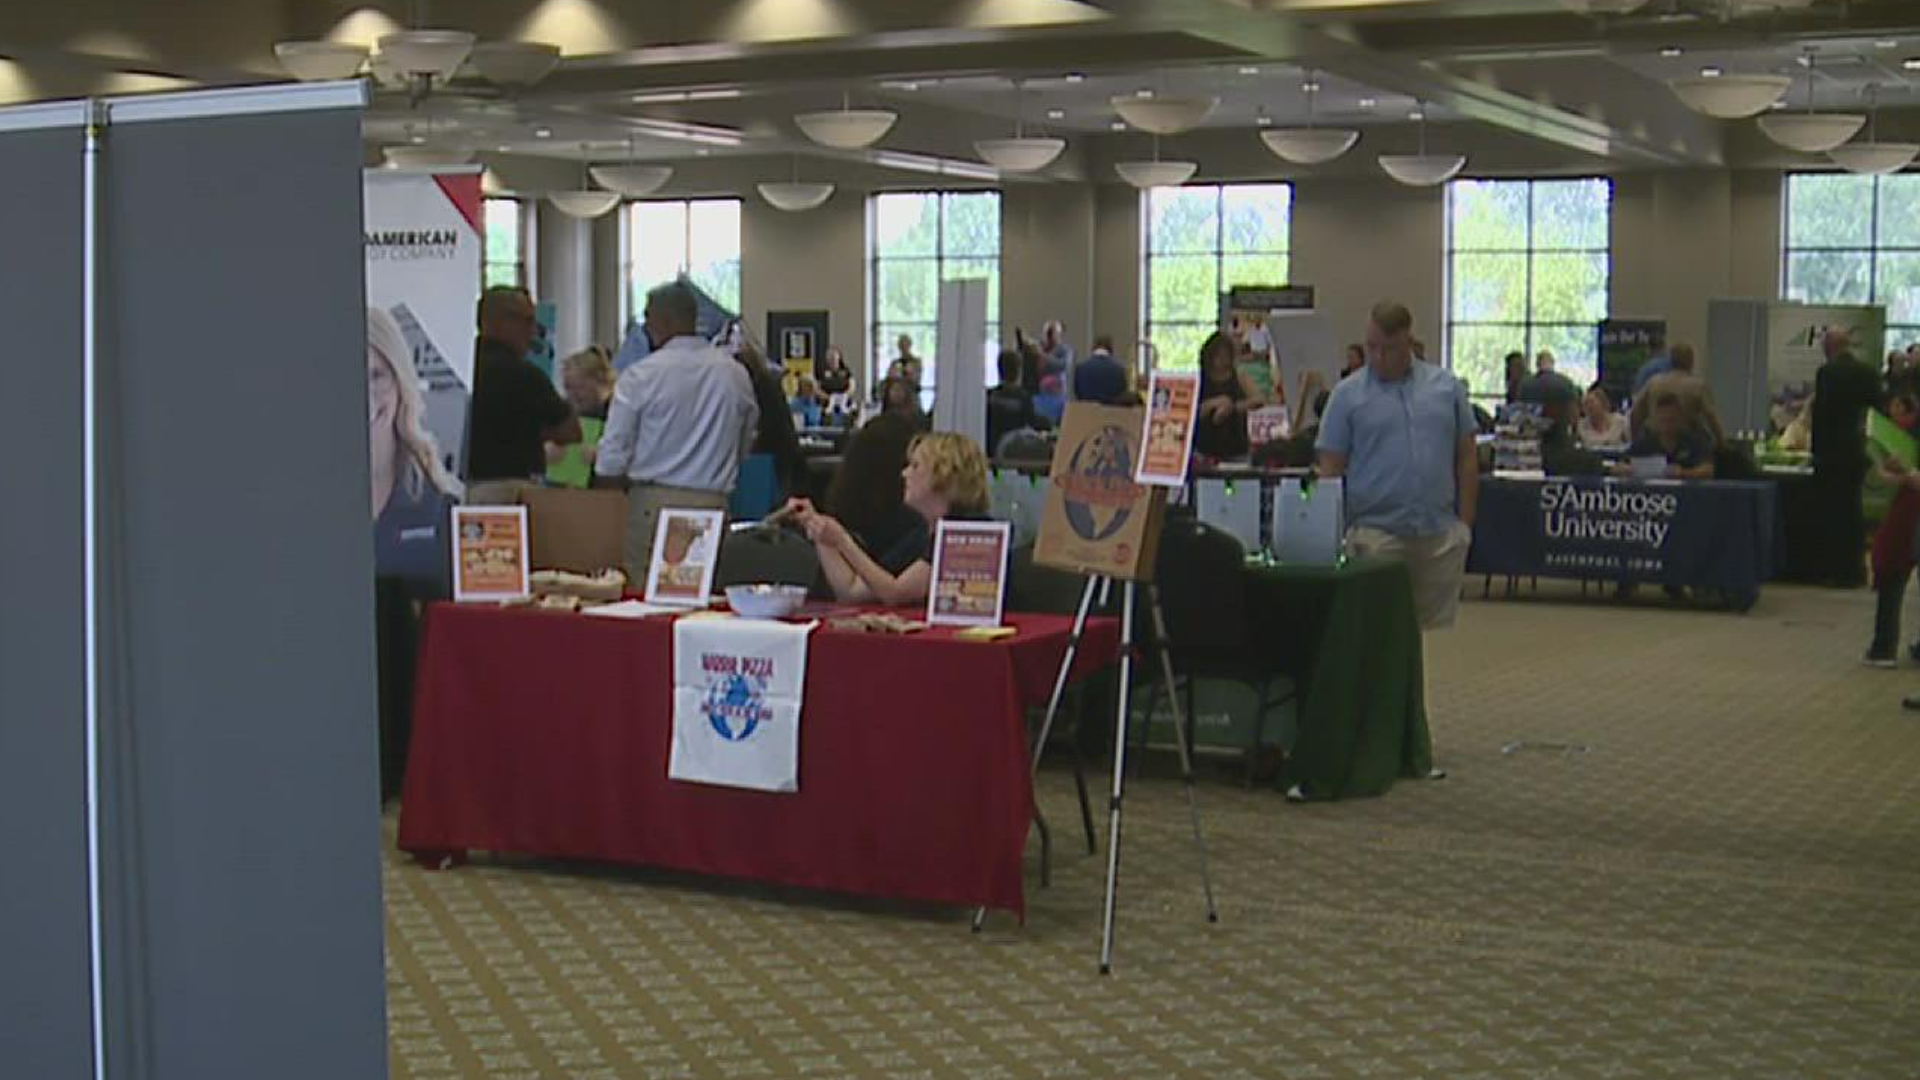 The event, now in its 7th year, saw 80 employers look to fill more than 1000 positions across many industries.